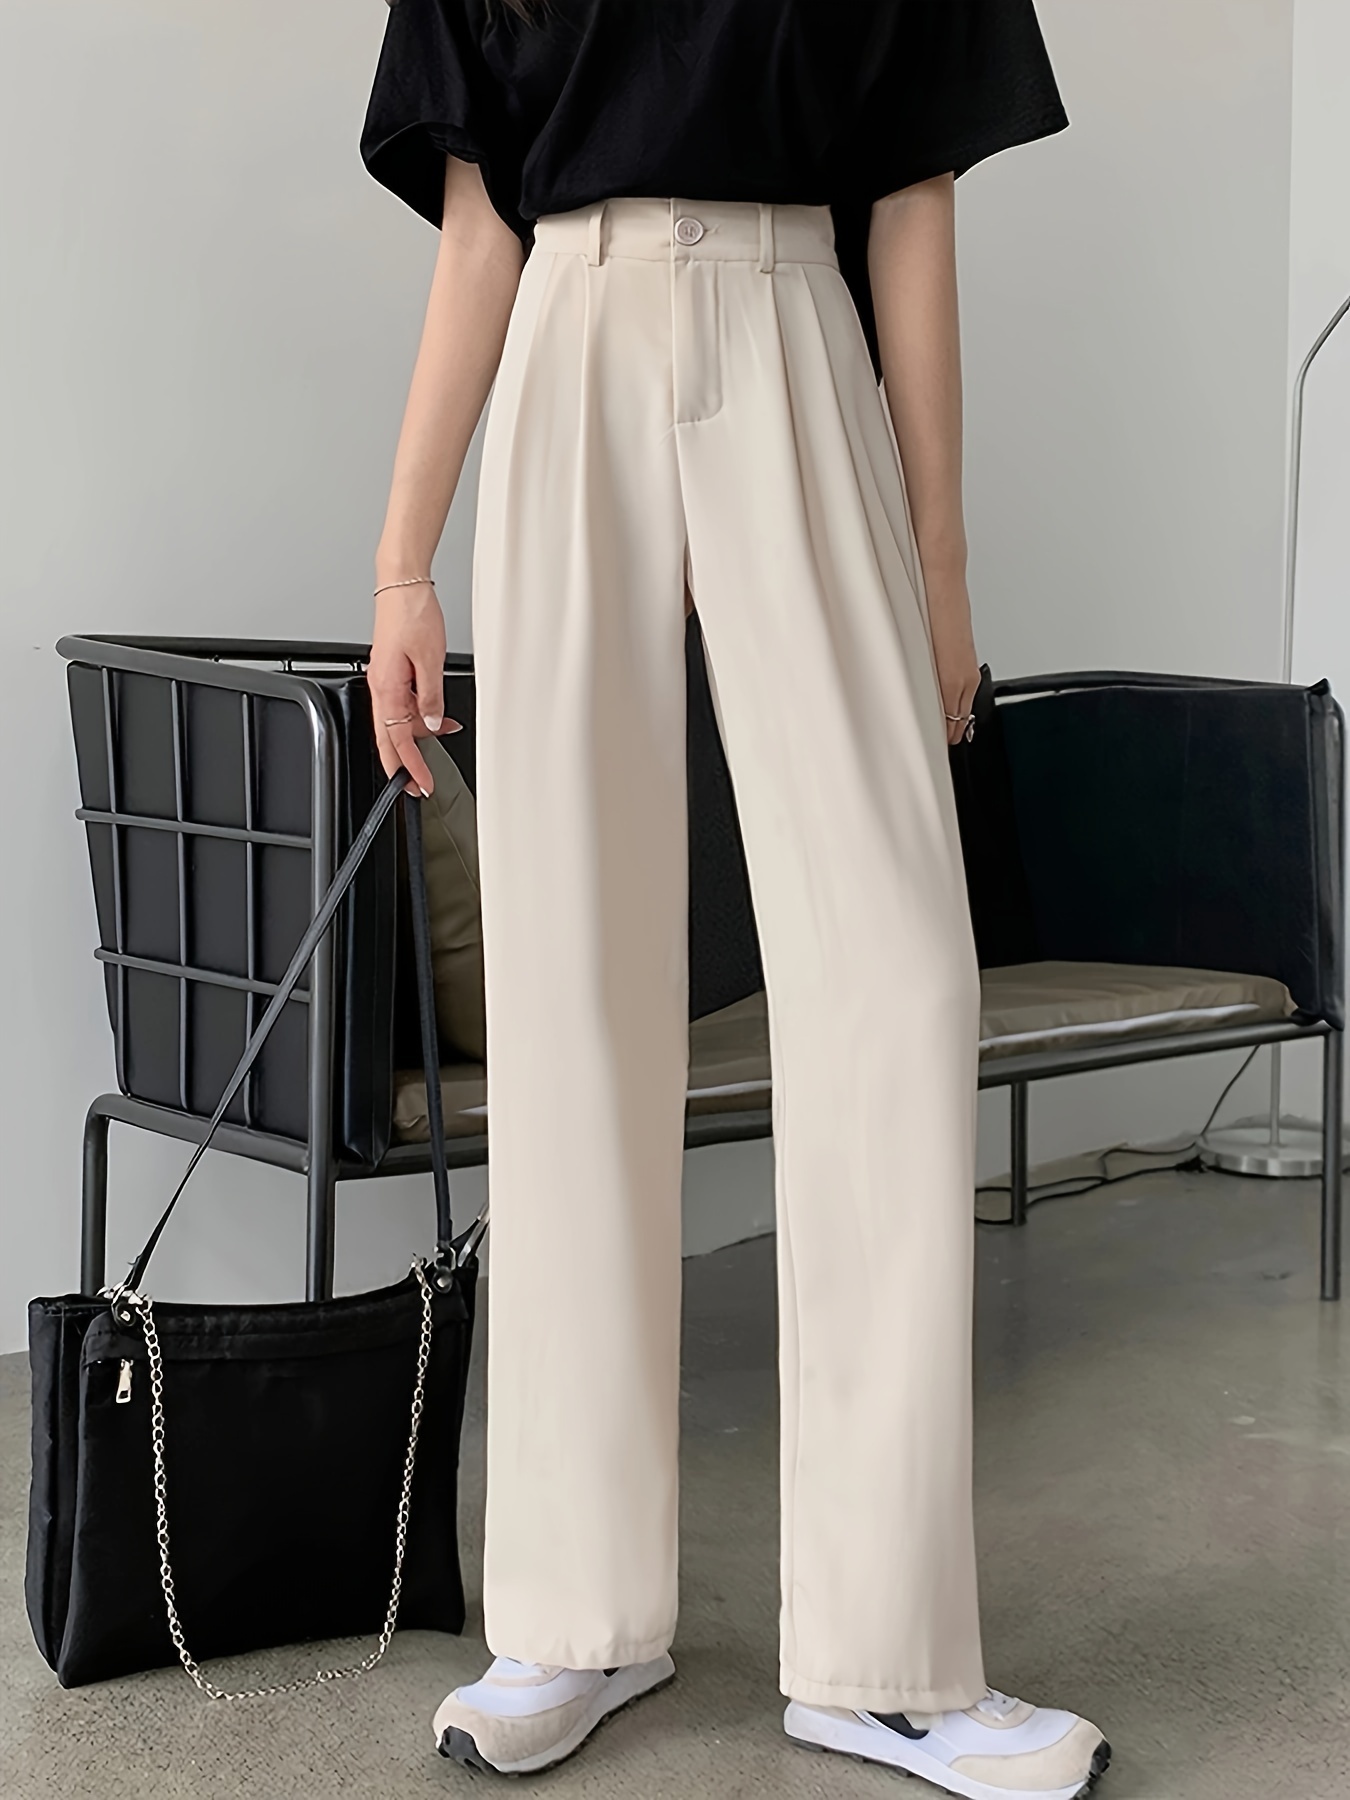 Straight Leg Pleated Trouser, High Waist Pants For Office, Every Day,  Women's Clothing